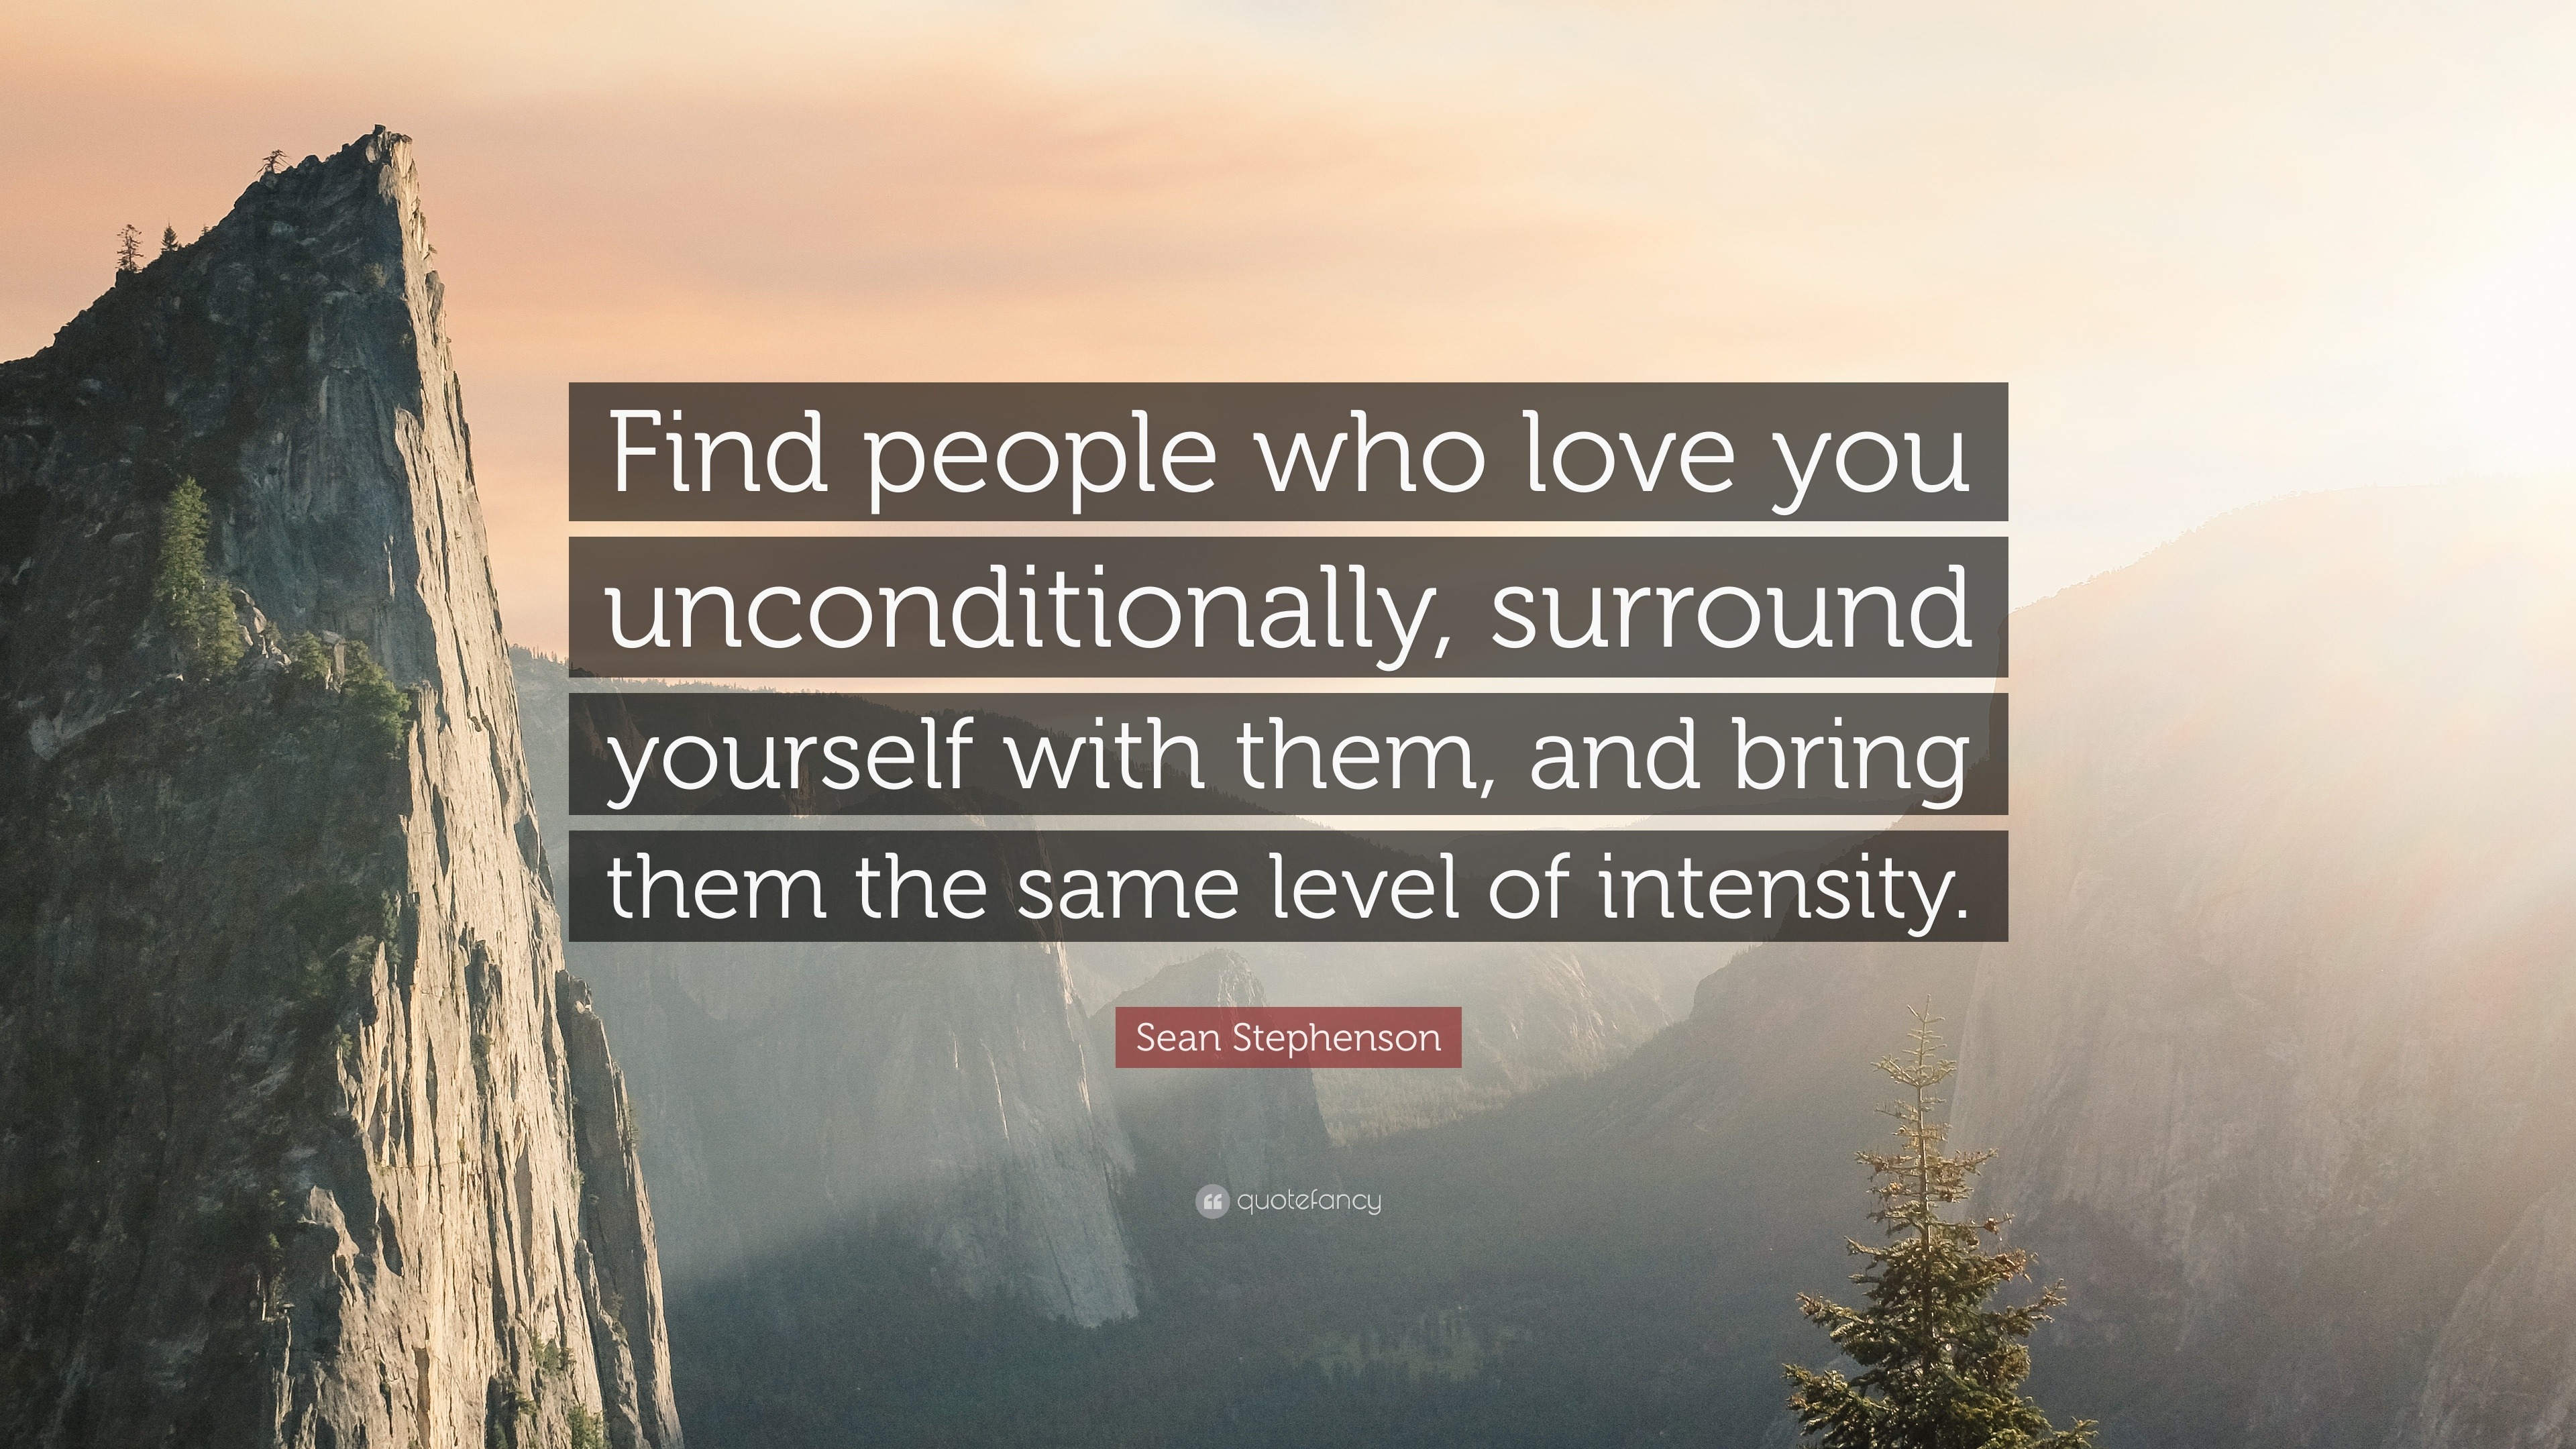 Sean Stephenson Quote “Find people who love you unconditionally surround yourself with them